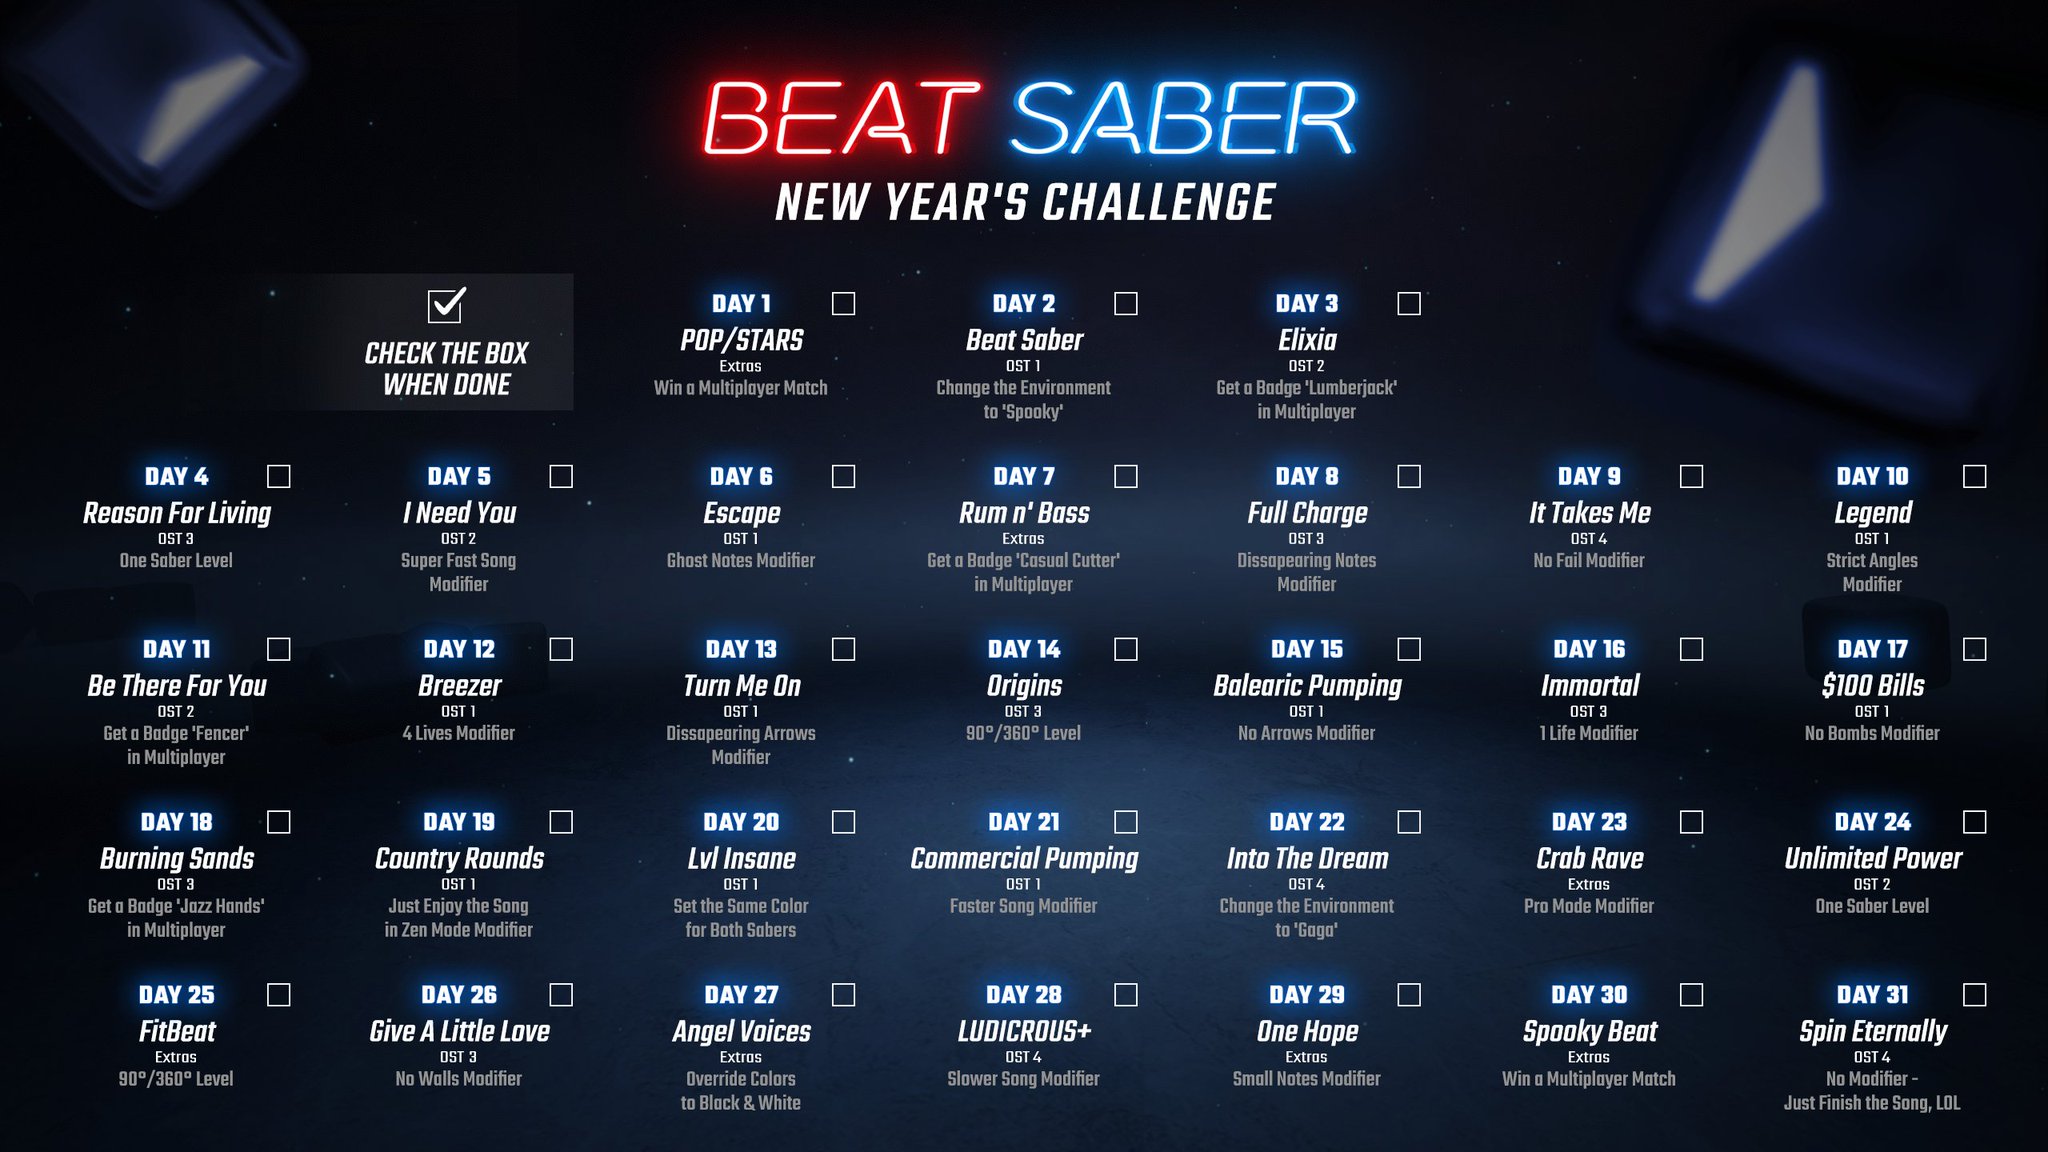 Saber on Twitter: "Ready to moving? Kick-start your new year with a Beat Saber Challenge! 💪 Join us any day in January and each challenge every day. Add #31BeatChallenge